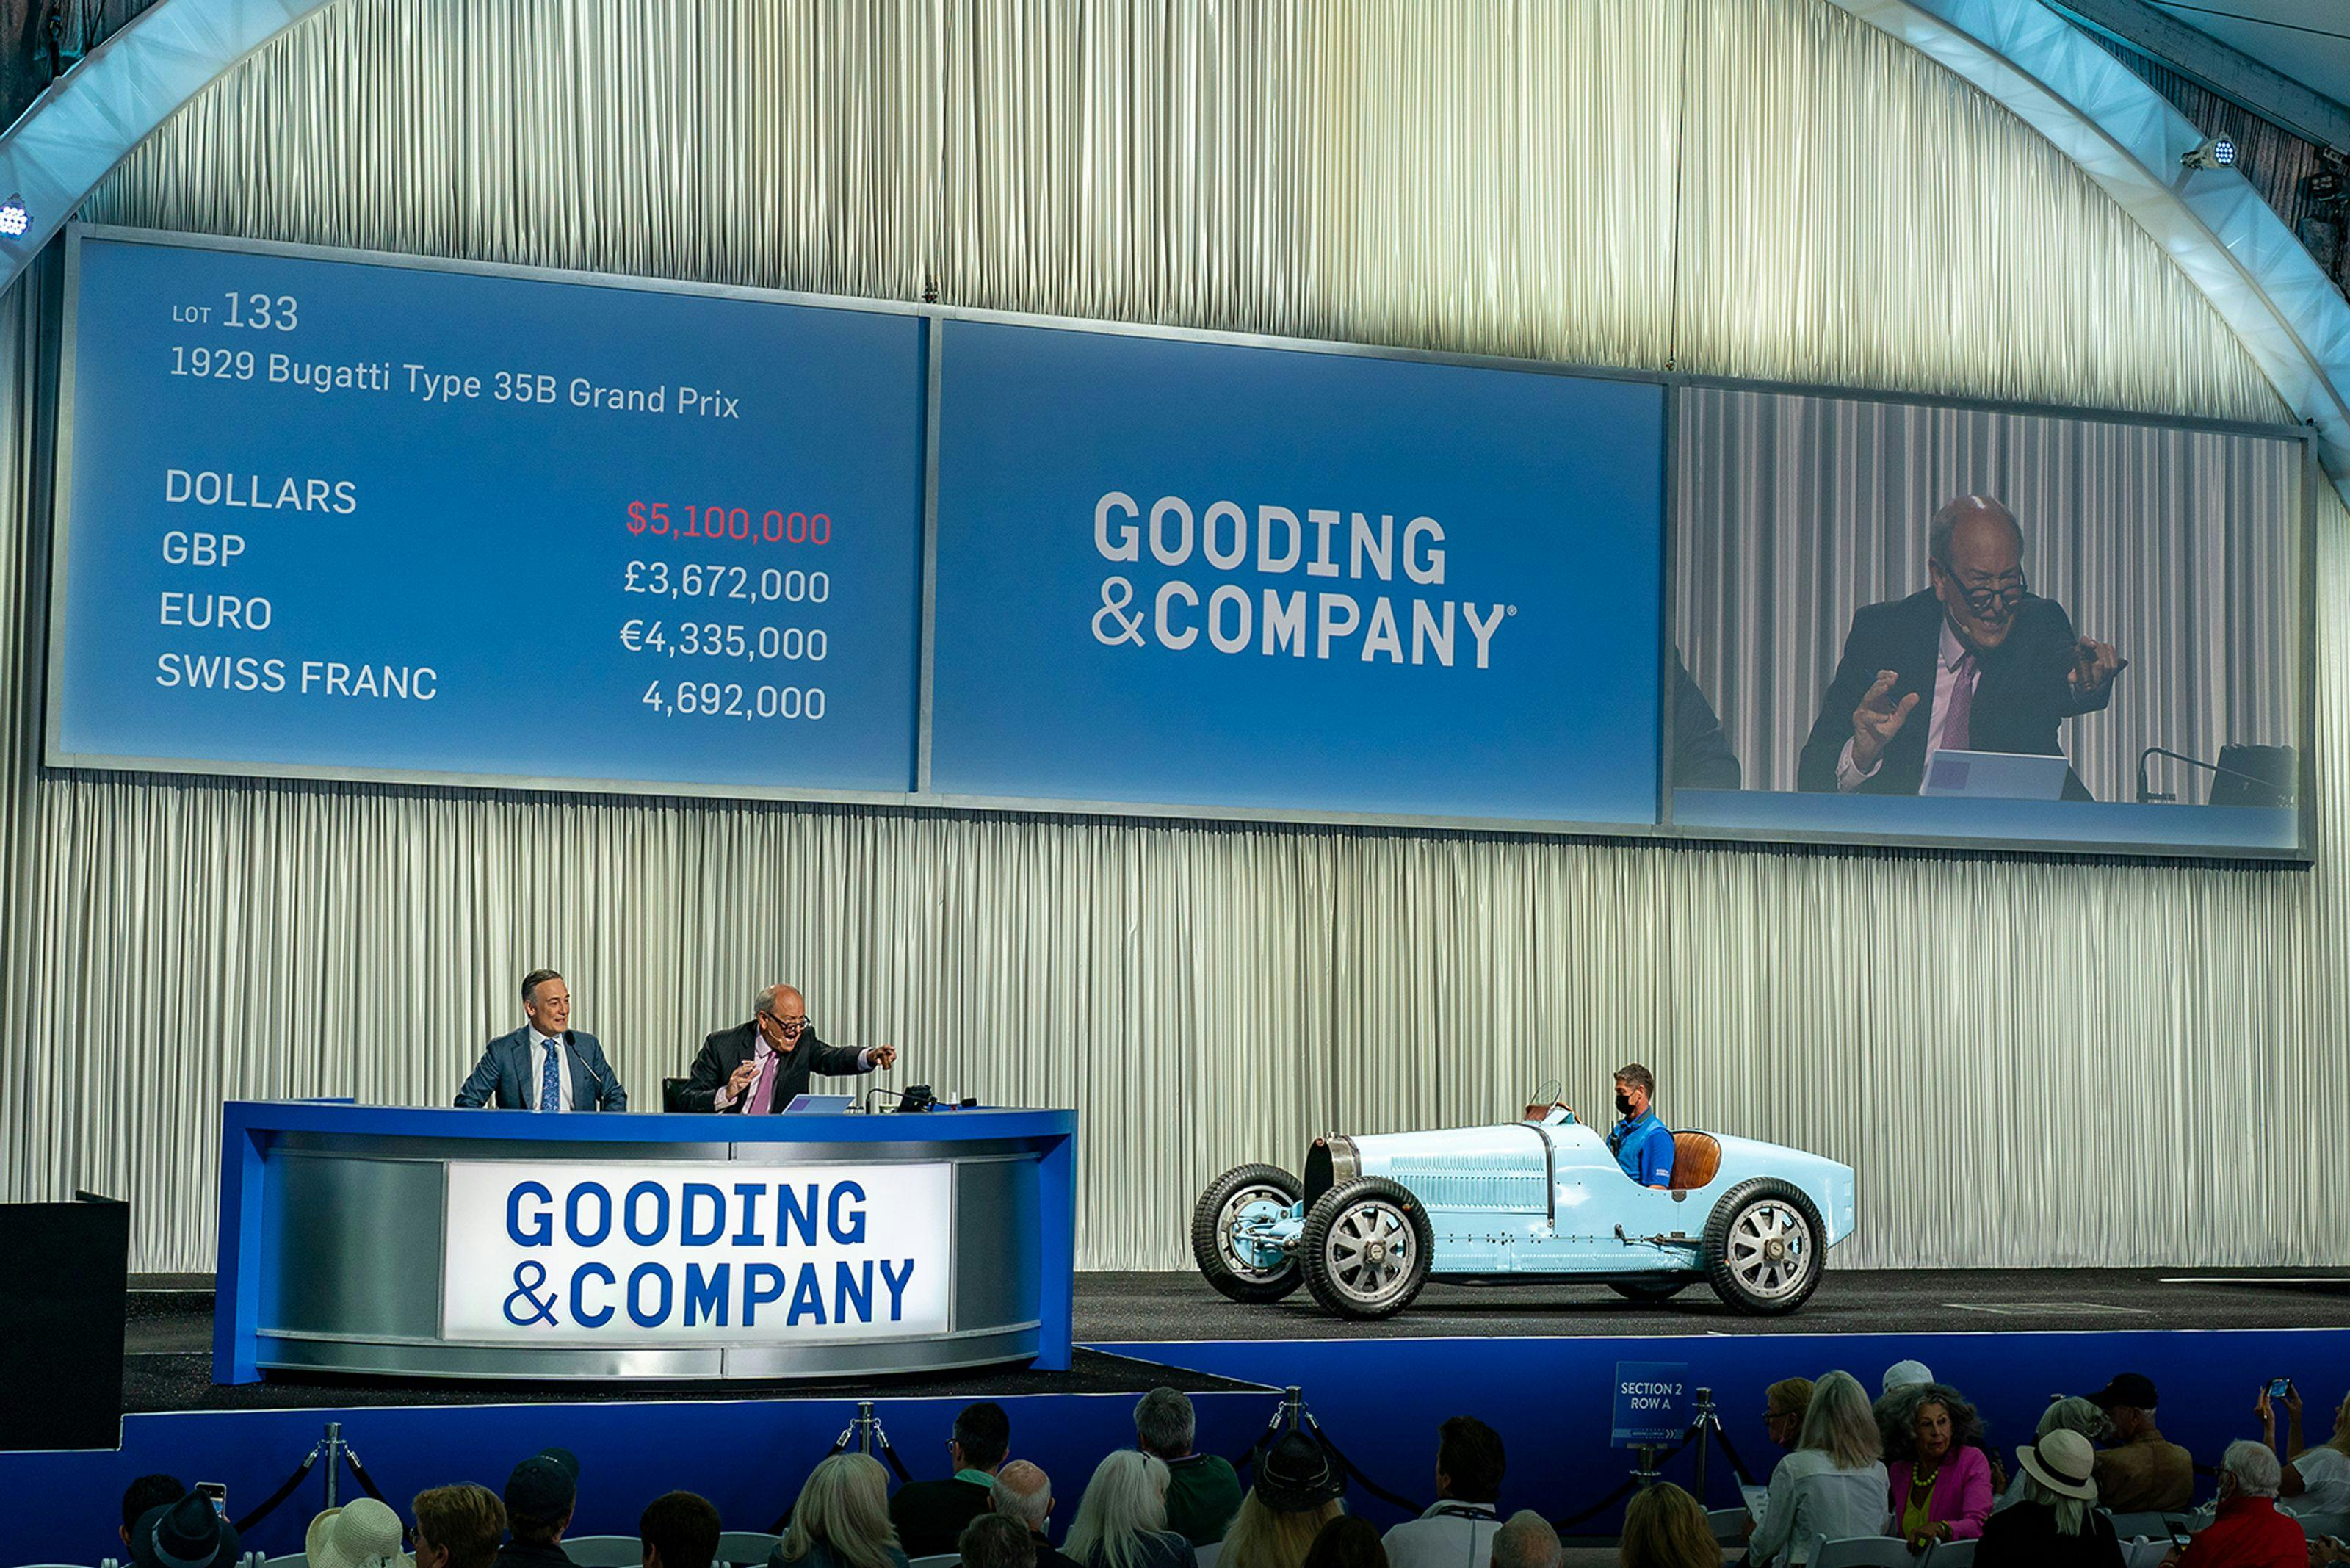 Bugatti models collect multiple awards and set auction records at Monterey Car Week